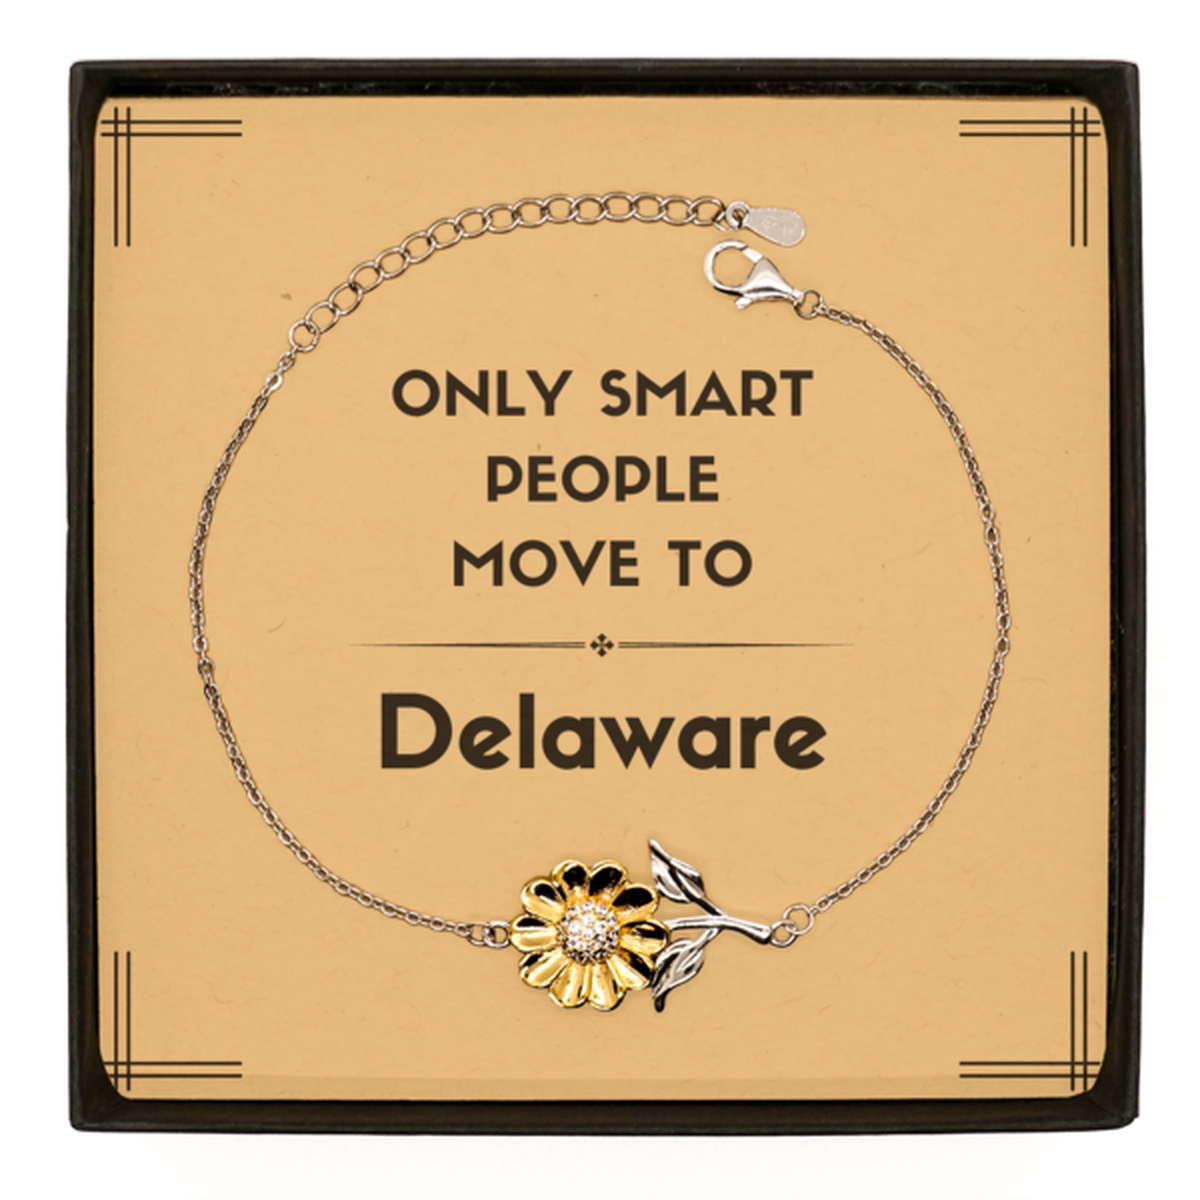 Only smart people move to Delaware Sunflower Bracelet, Message Card Gifts For Delaware, Move to Delaware Gifts for Friends Coworker Funny Saying Quote